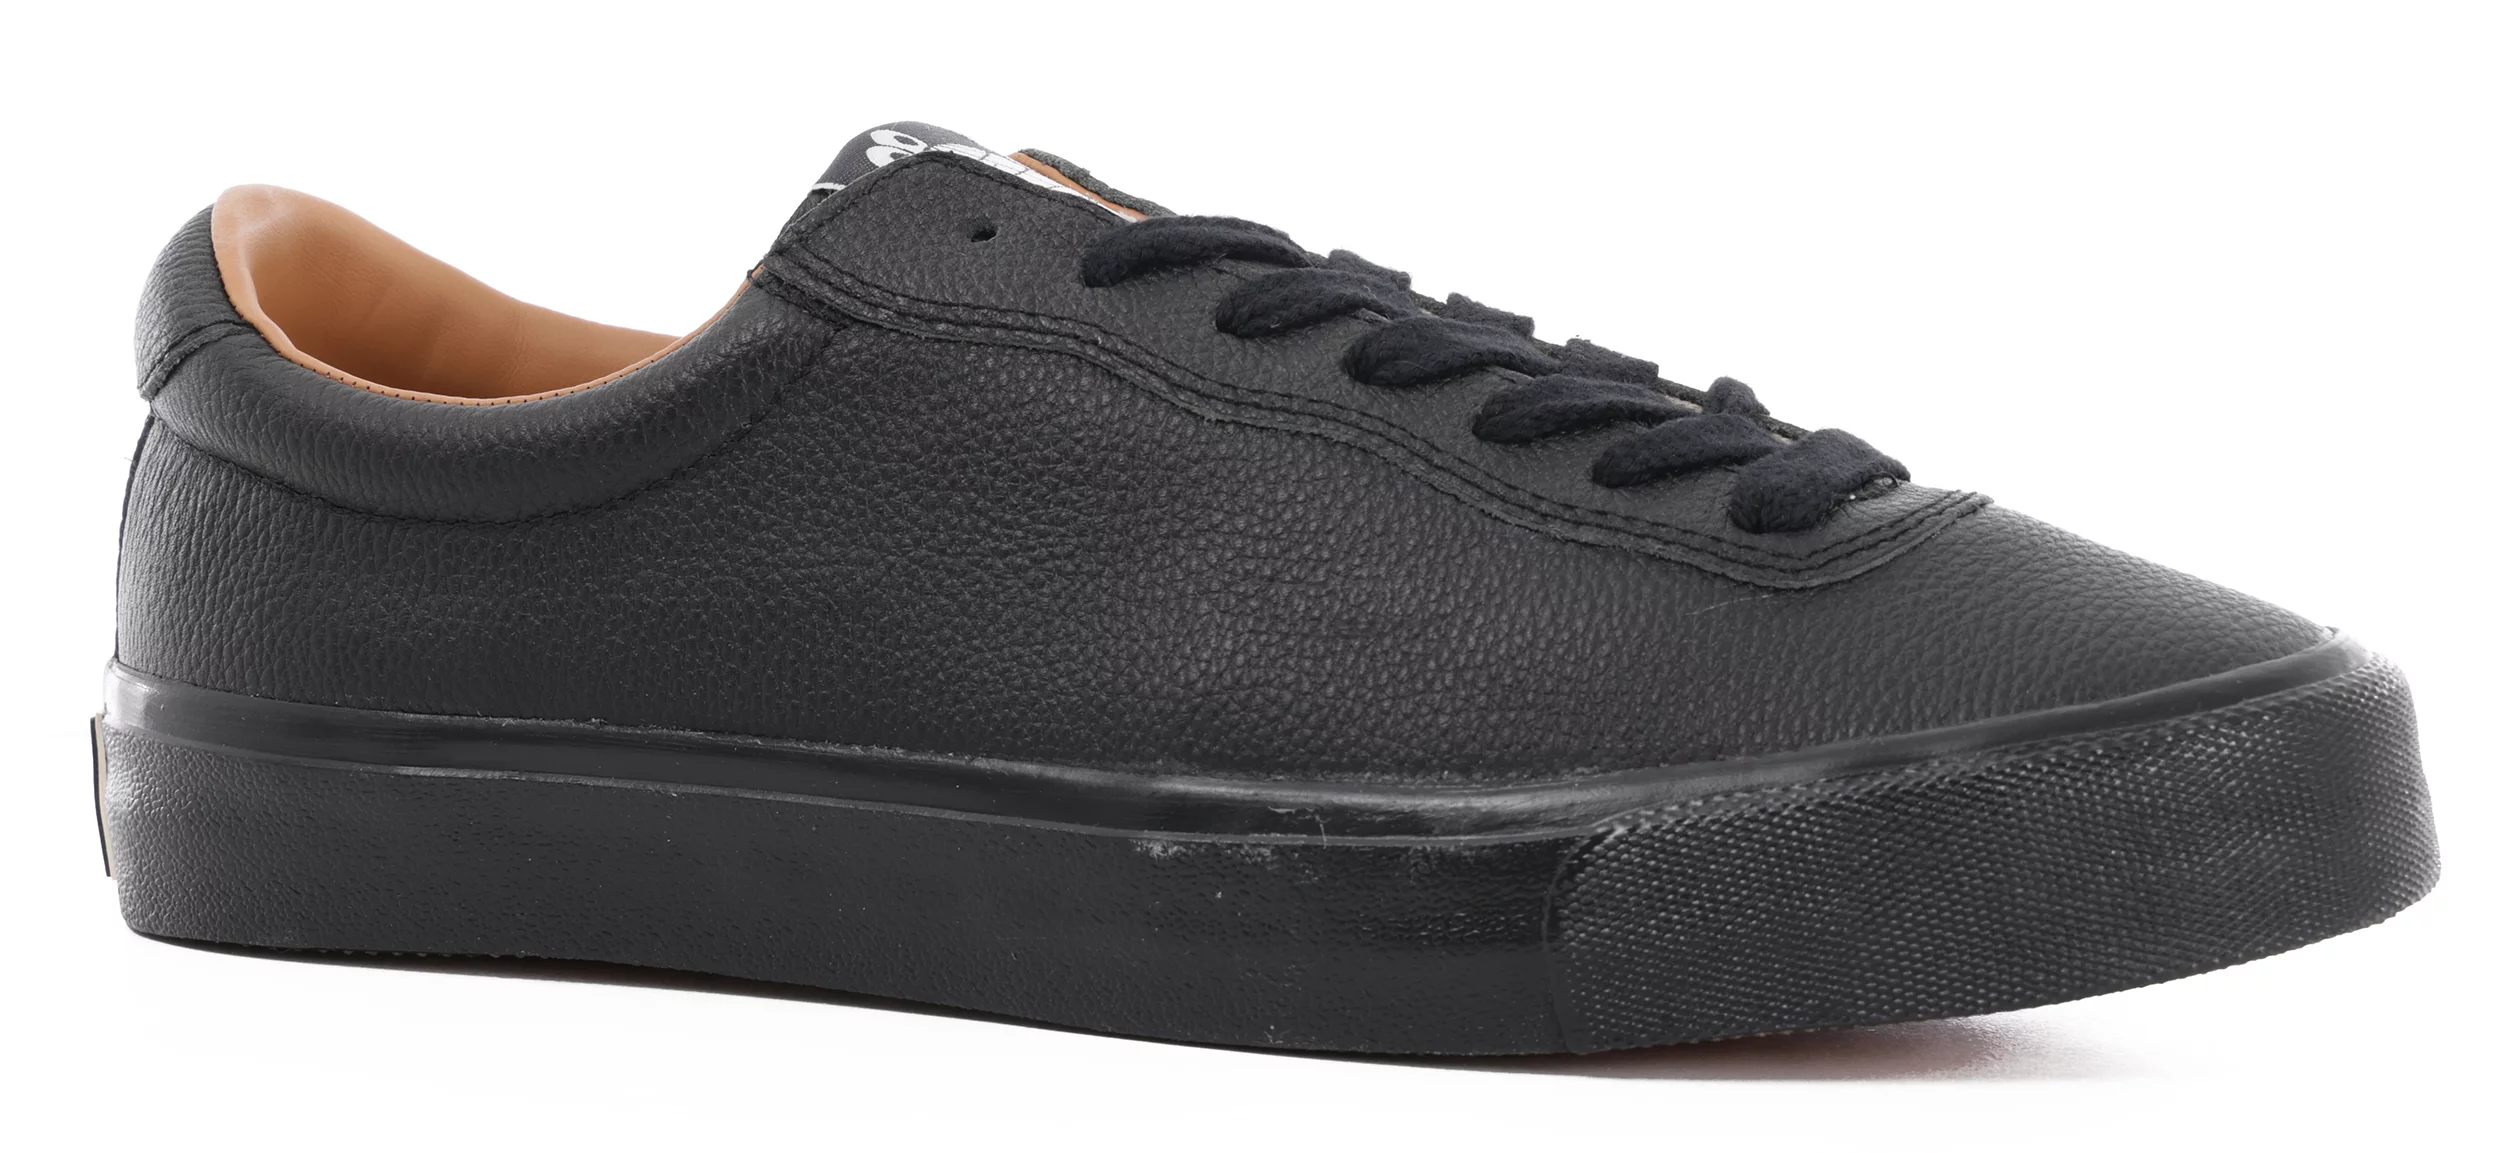 VM001 - Leather Low Top Skate Shoes